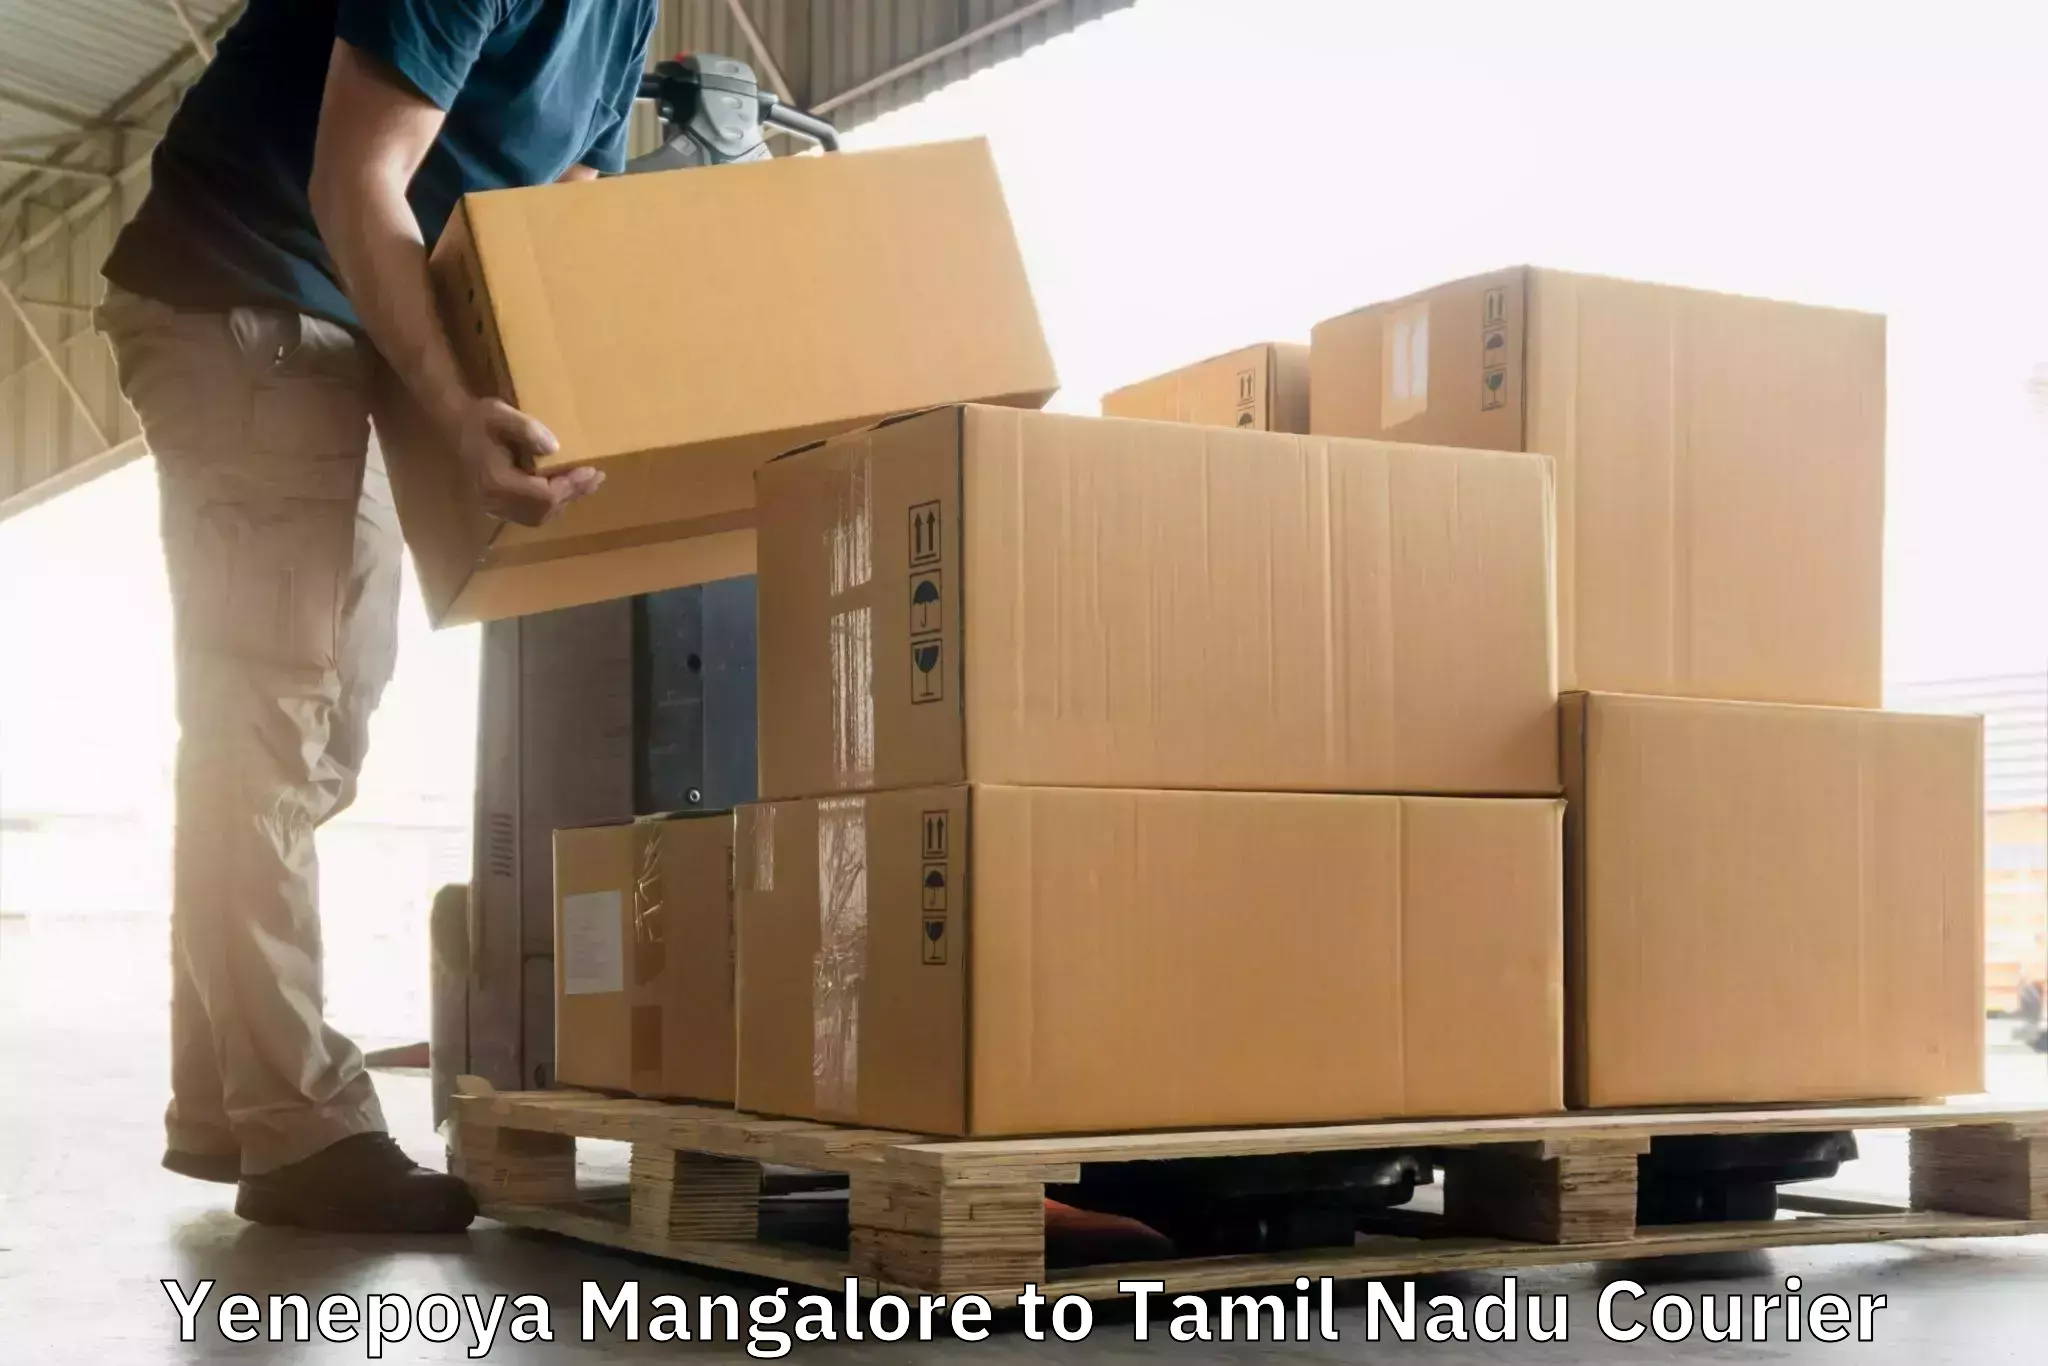 Express package handling Yenepoya Mangalore to Shanmugha Arts Science Technology and Research Academy Thanjavur